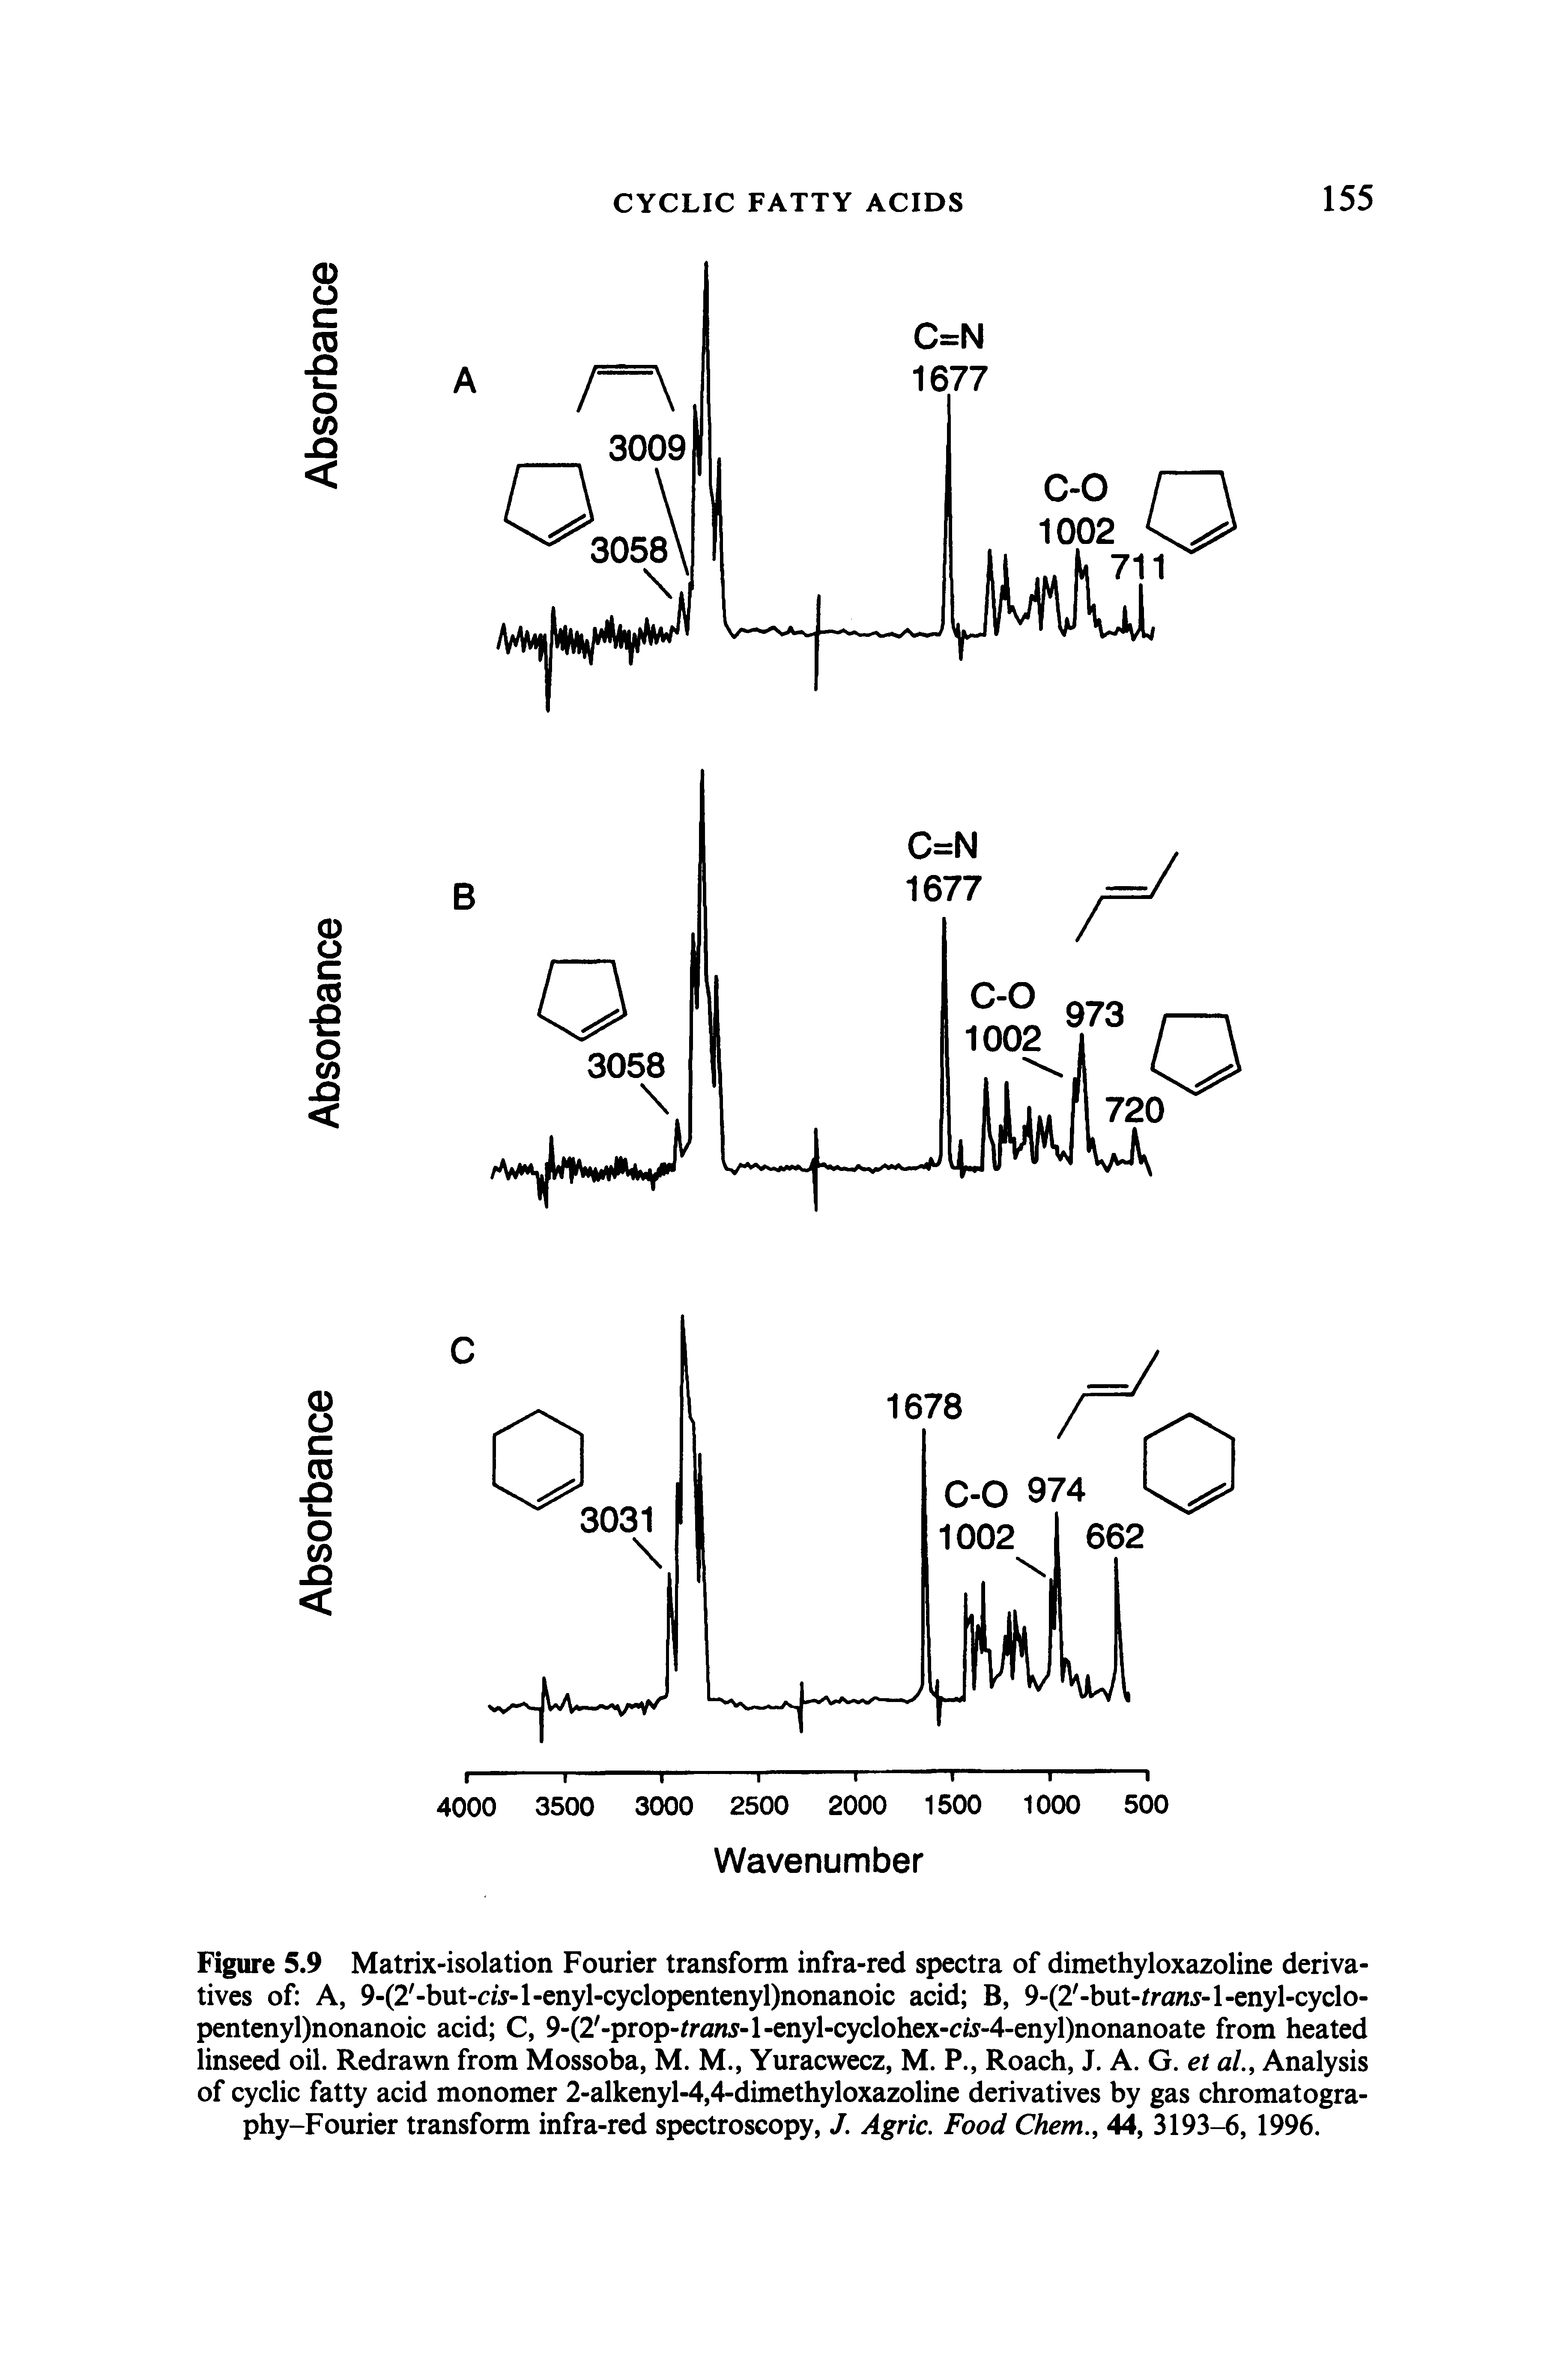 Figure 5.9 Matrix-isolation Fourier transform infra-red spectra of dimethyloxazoline derivatives of A, 9-(2 -but-c/j-l-enyl-cyclopentenyl)nonanoic acid B, 9-(2 -but-rra j-l-enyl-cyclo-pentenyl)nonanoic acid C, 9-(2 -prop-/ra/w-l-enyl-cyclohex-cw-4-enyl)nonanoate from heated linseed oil. Redrawn from Mossoba, M. M., Yuracwecz, M. P., Roach, J. A. G. et aL, Analysis of cyclic fatty acid monomer 2-alkenyl-4,4-dimethyloxazoline derivatives by gas chromatogra-phy-Fourier transform infra-red spectroscopy, J. Agric. Food Chem., 44, 3193-6, 1996.